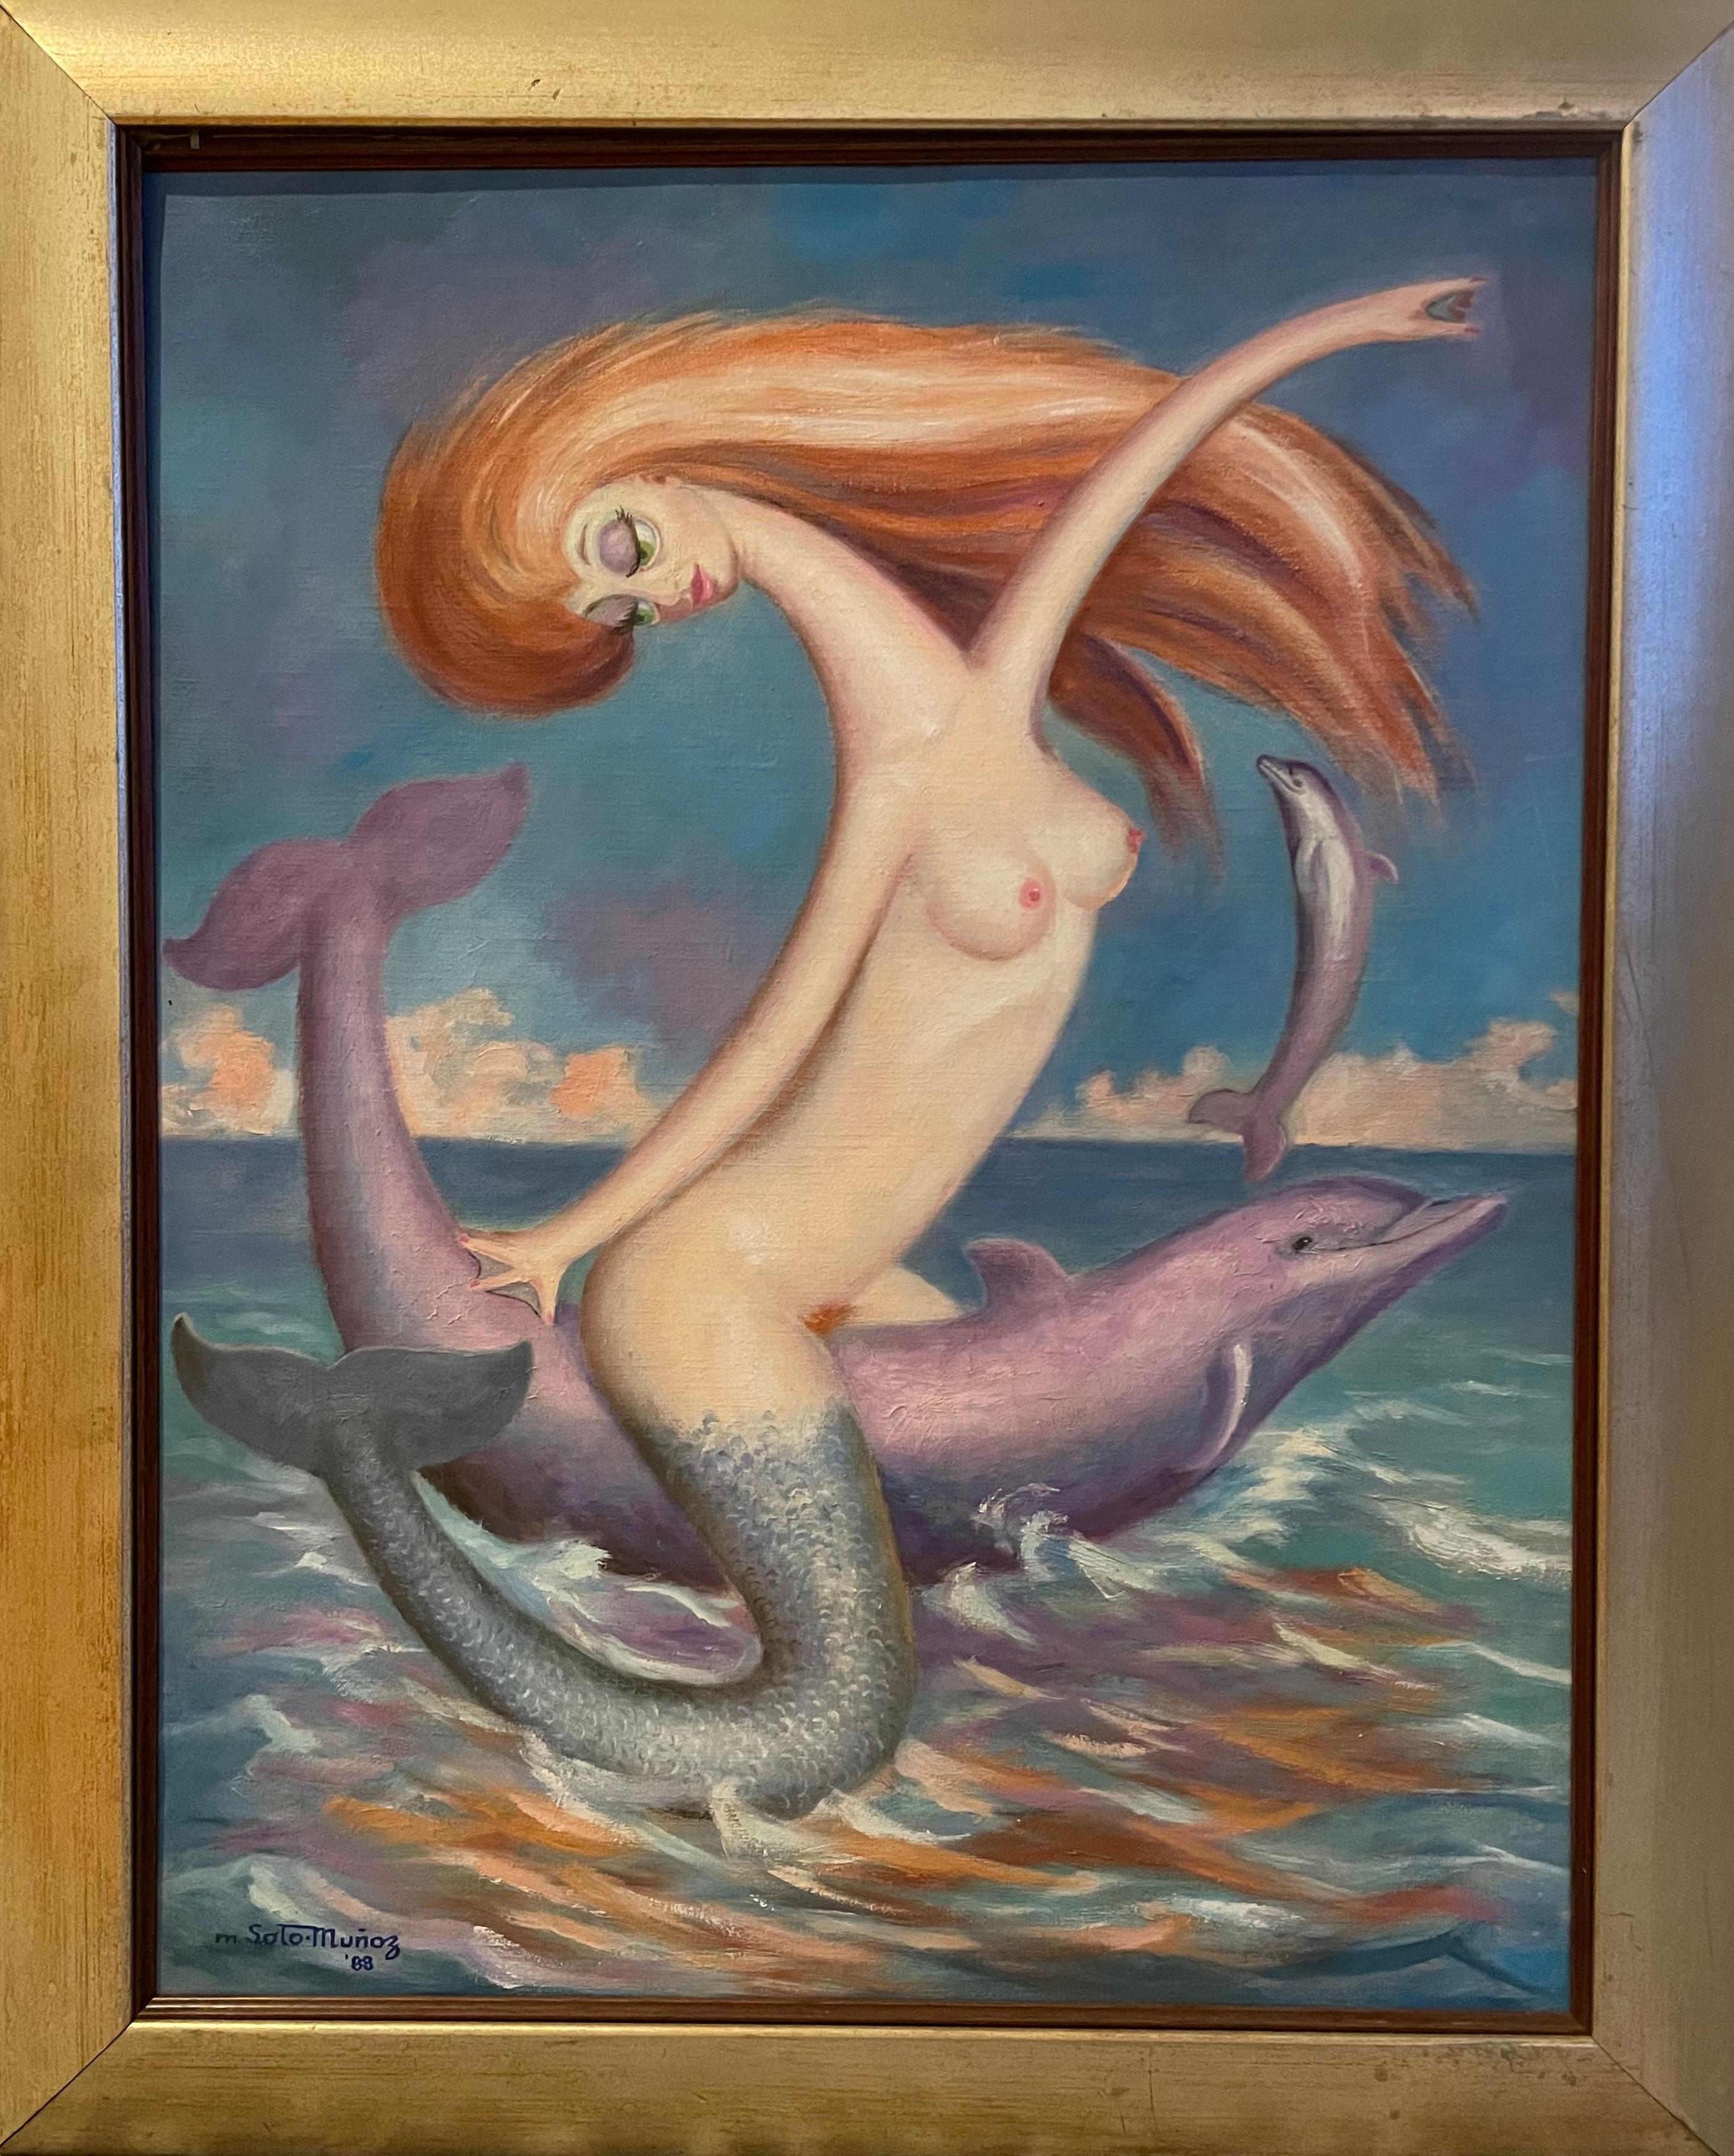 Mermaid with dolphins - Painting by Manuel Soto Munoz